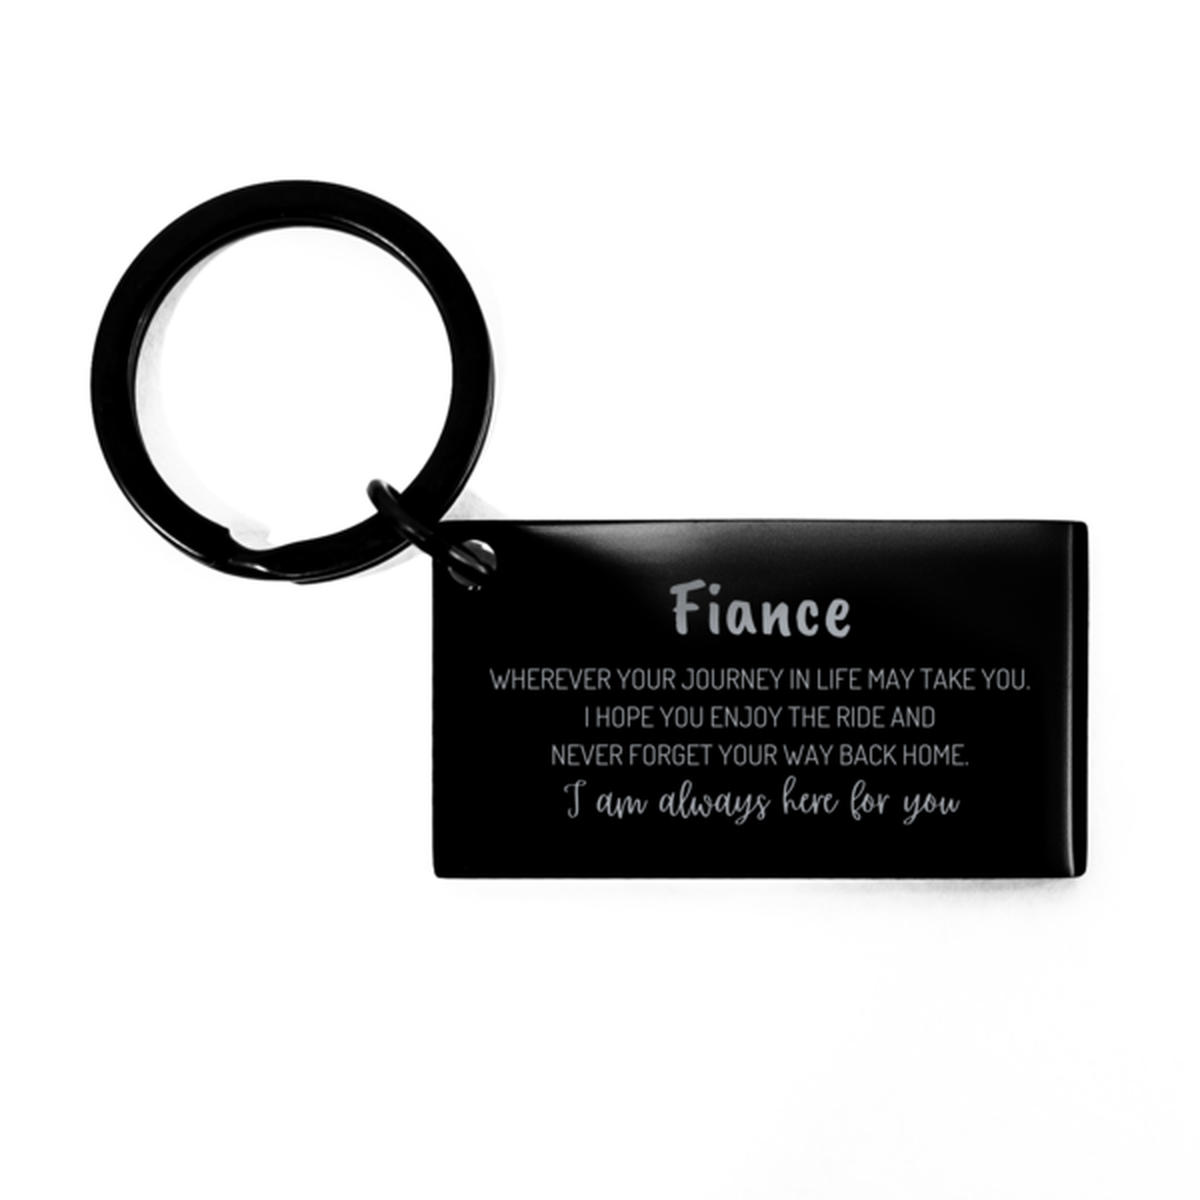 Fiance wherever your journey in life may take you, I am always here for you Fiance Keychain, Awesome Christmas Gifts For Fiance, Fiance Birthday Gifts for Men Women Family Loved One